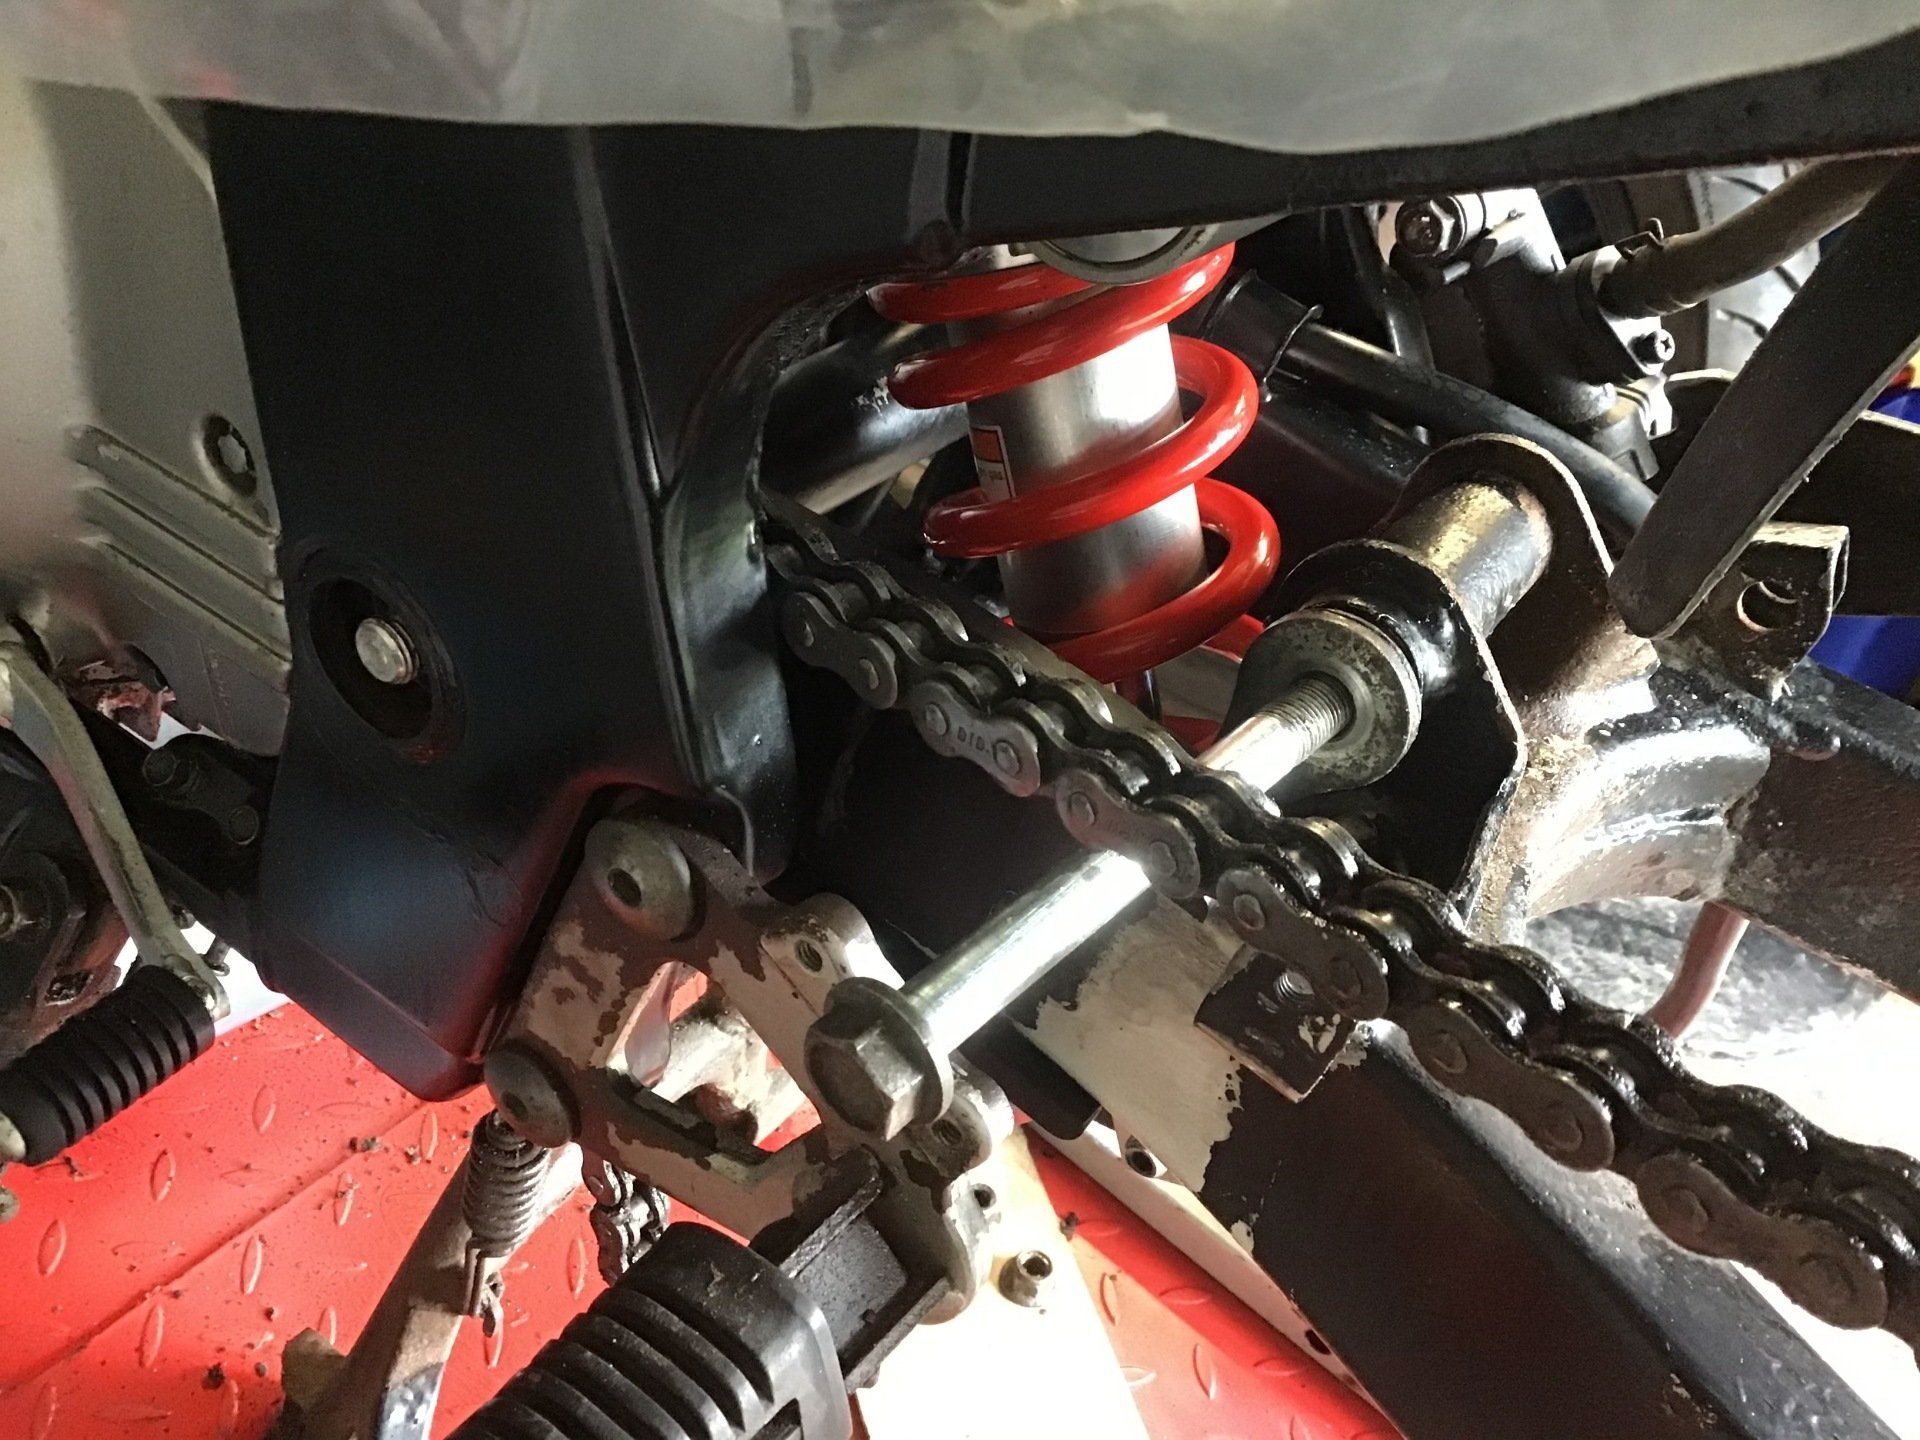 Fitting R6 shock to GS50